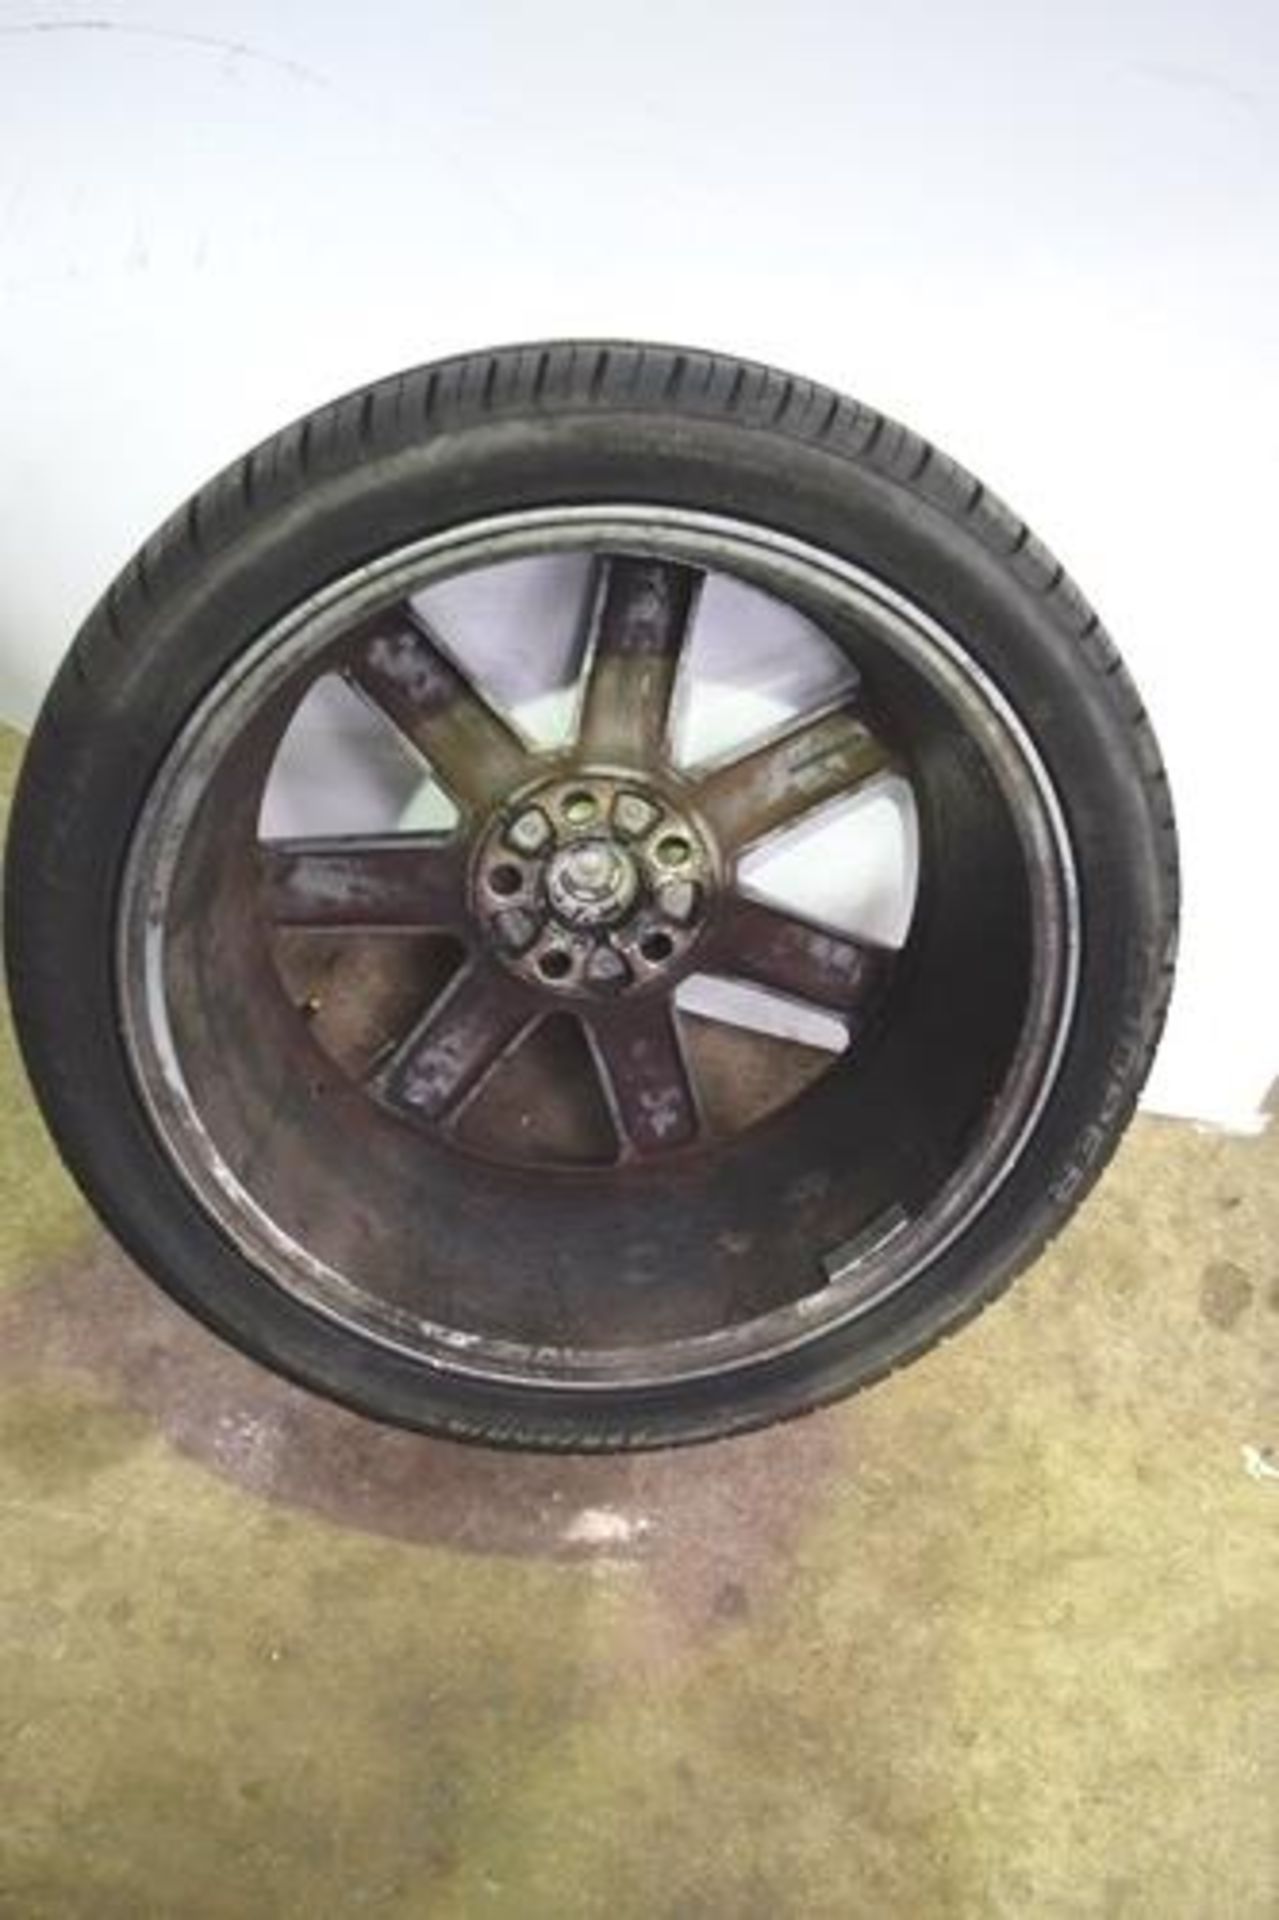 1 x Ford 5 stud alloy wheel fitted with Cooper Zeon C58 tyre, size 225/40R18 - Second-hand (GSend) - Image 3 of 3